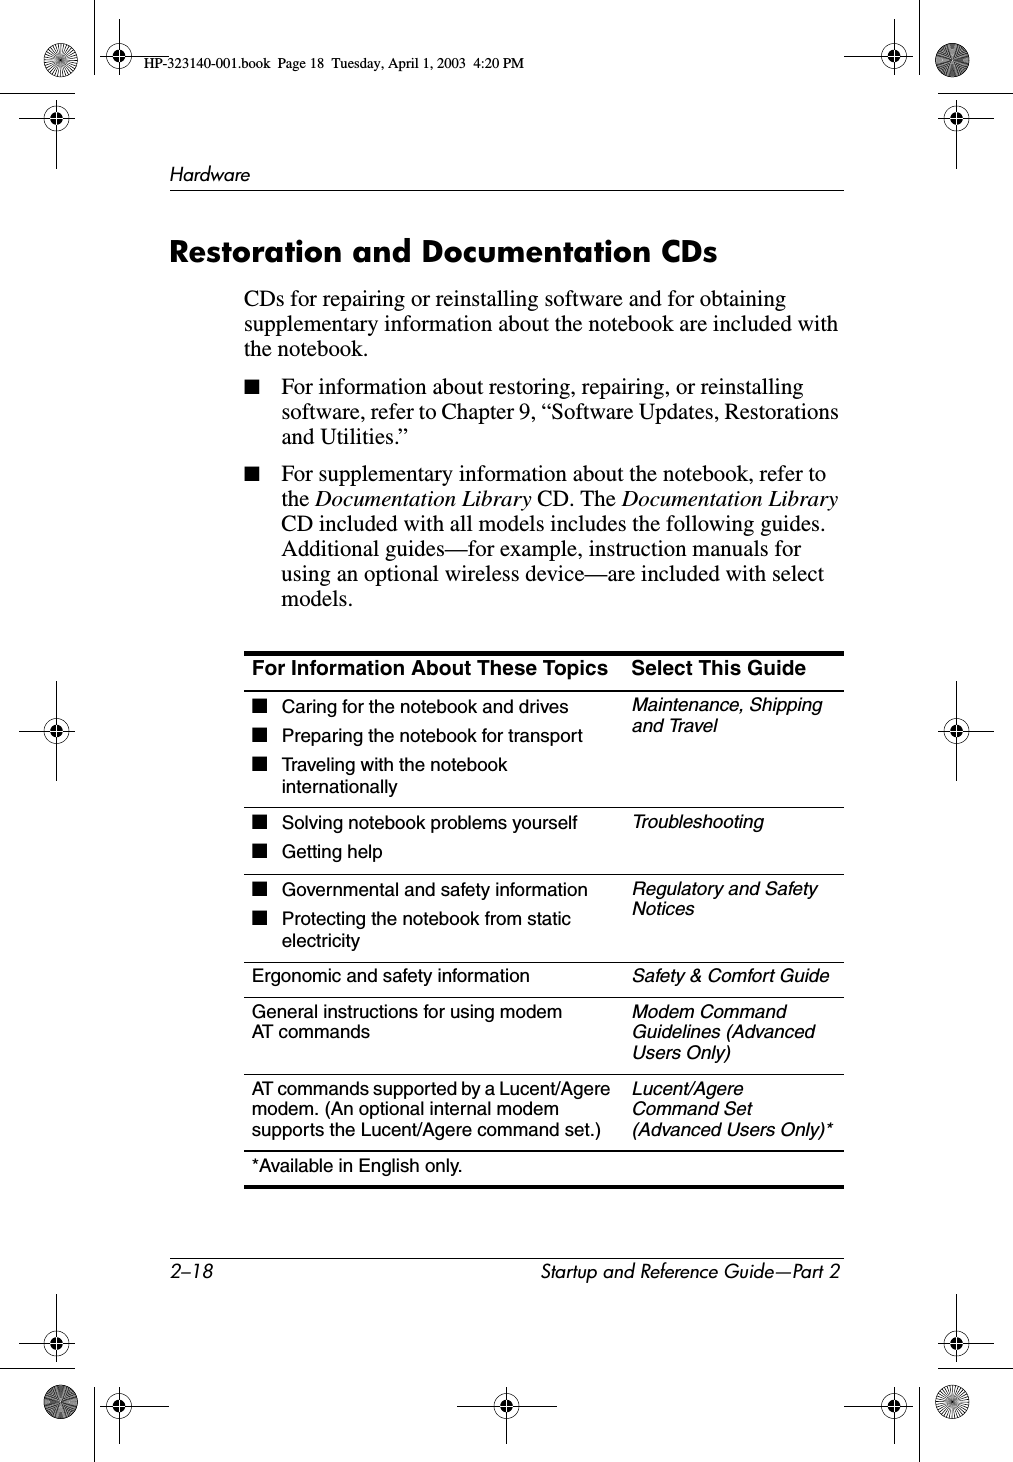 2–18 Startup and Reference Guide—Part 2HardwareRestoration and Documentation CDsCDs for repairing or reinstalling software and for obtaining supplementary information about the notebook are included with the notebook. ■For information about restoring, repairing, or reinstalling software, refer to Chapter 9, “Software Updates, Restorations and Utilities.”■For supplementary information about the notebook, refer to the Documentation Library CD. The Documentation LibraryCD included with all models includes the following guides. Additional guides—for example, instruction manuals for using an optional wireless device—are included with select models.For Information About These Topics Select This Guide■Caring for the notebook and drives■Preparing the notebook for transport■Traveling with the notebook internationallyMaintenance, Shipping and Travel■Solving notebook problems yourself■Getting helpTroubleshooting■Governmental and safety information■Protecting the notebook from static electricityRegulatory and Safety NoticesErgonomic and safety informationSafety &amp; Comfort GuideGeneral instructions for using modem AT commandsModem Command Guidelines (Advanced Users Only)AT commands supported by a Lucent/Agere modem. (An optional internal modem supports the Lucent/Agere command set.)Lucent/AgereCommand Set (Advanced Users Only)**Available in English only.HP-323140-001.book  Page 18  Tuesday, April 1, 2003  4:20 PM